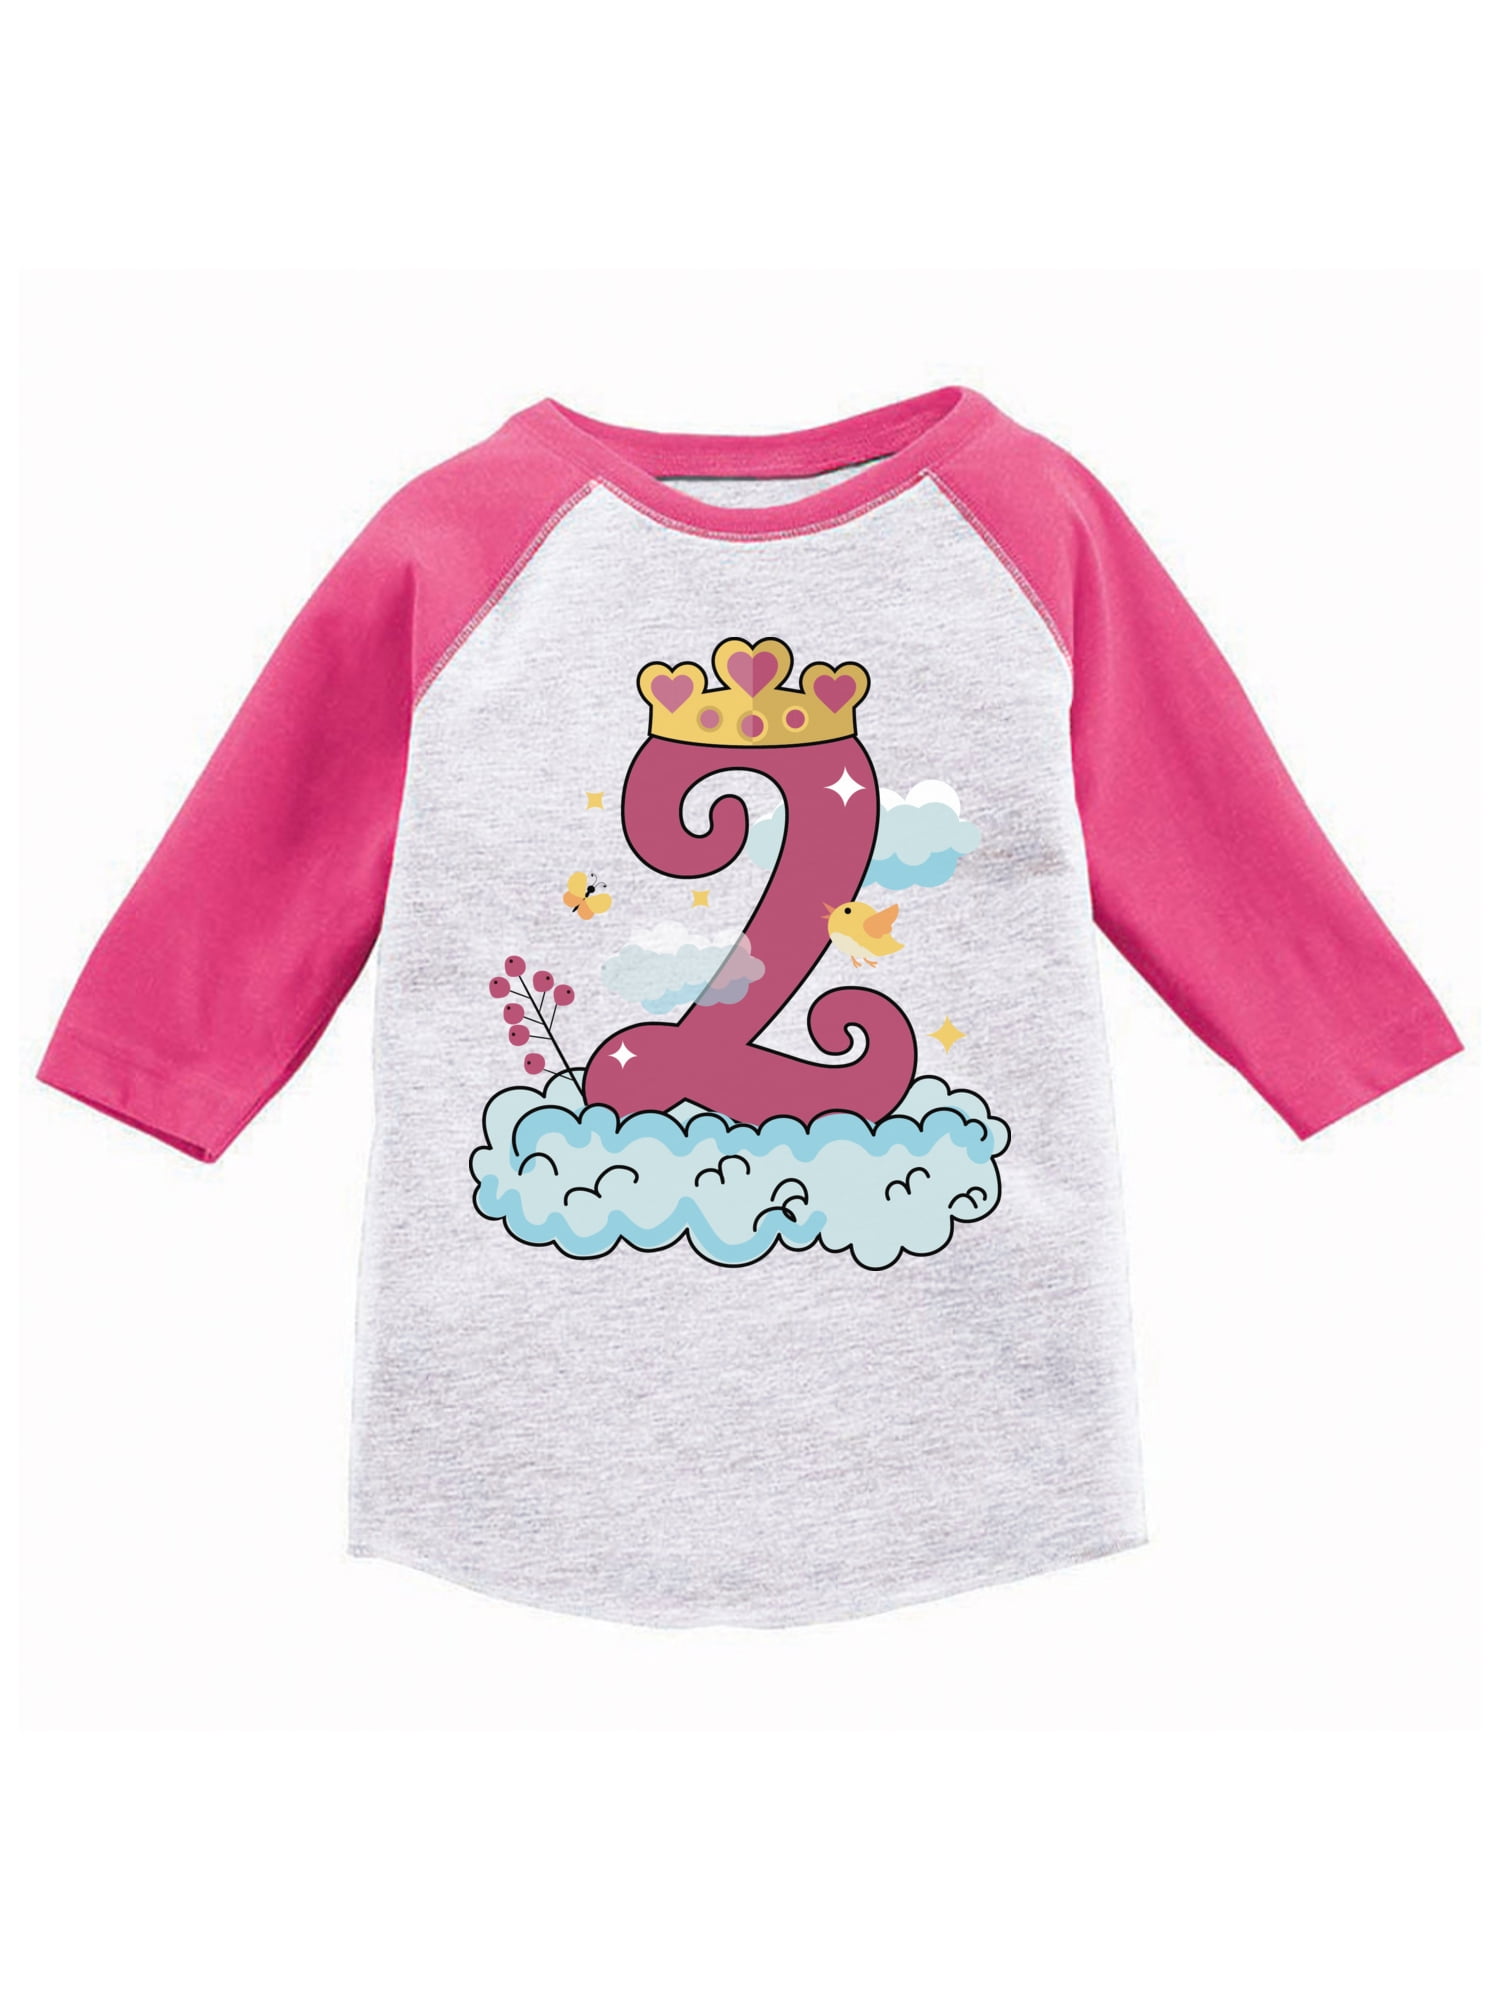 princess gifts for toddlers